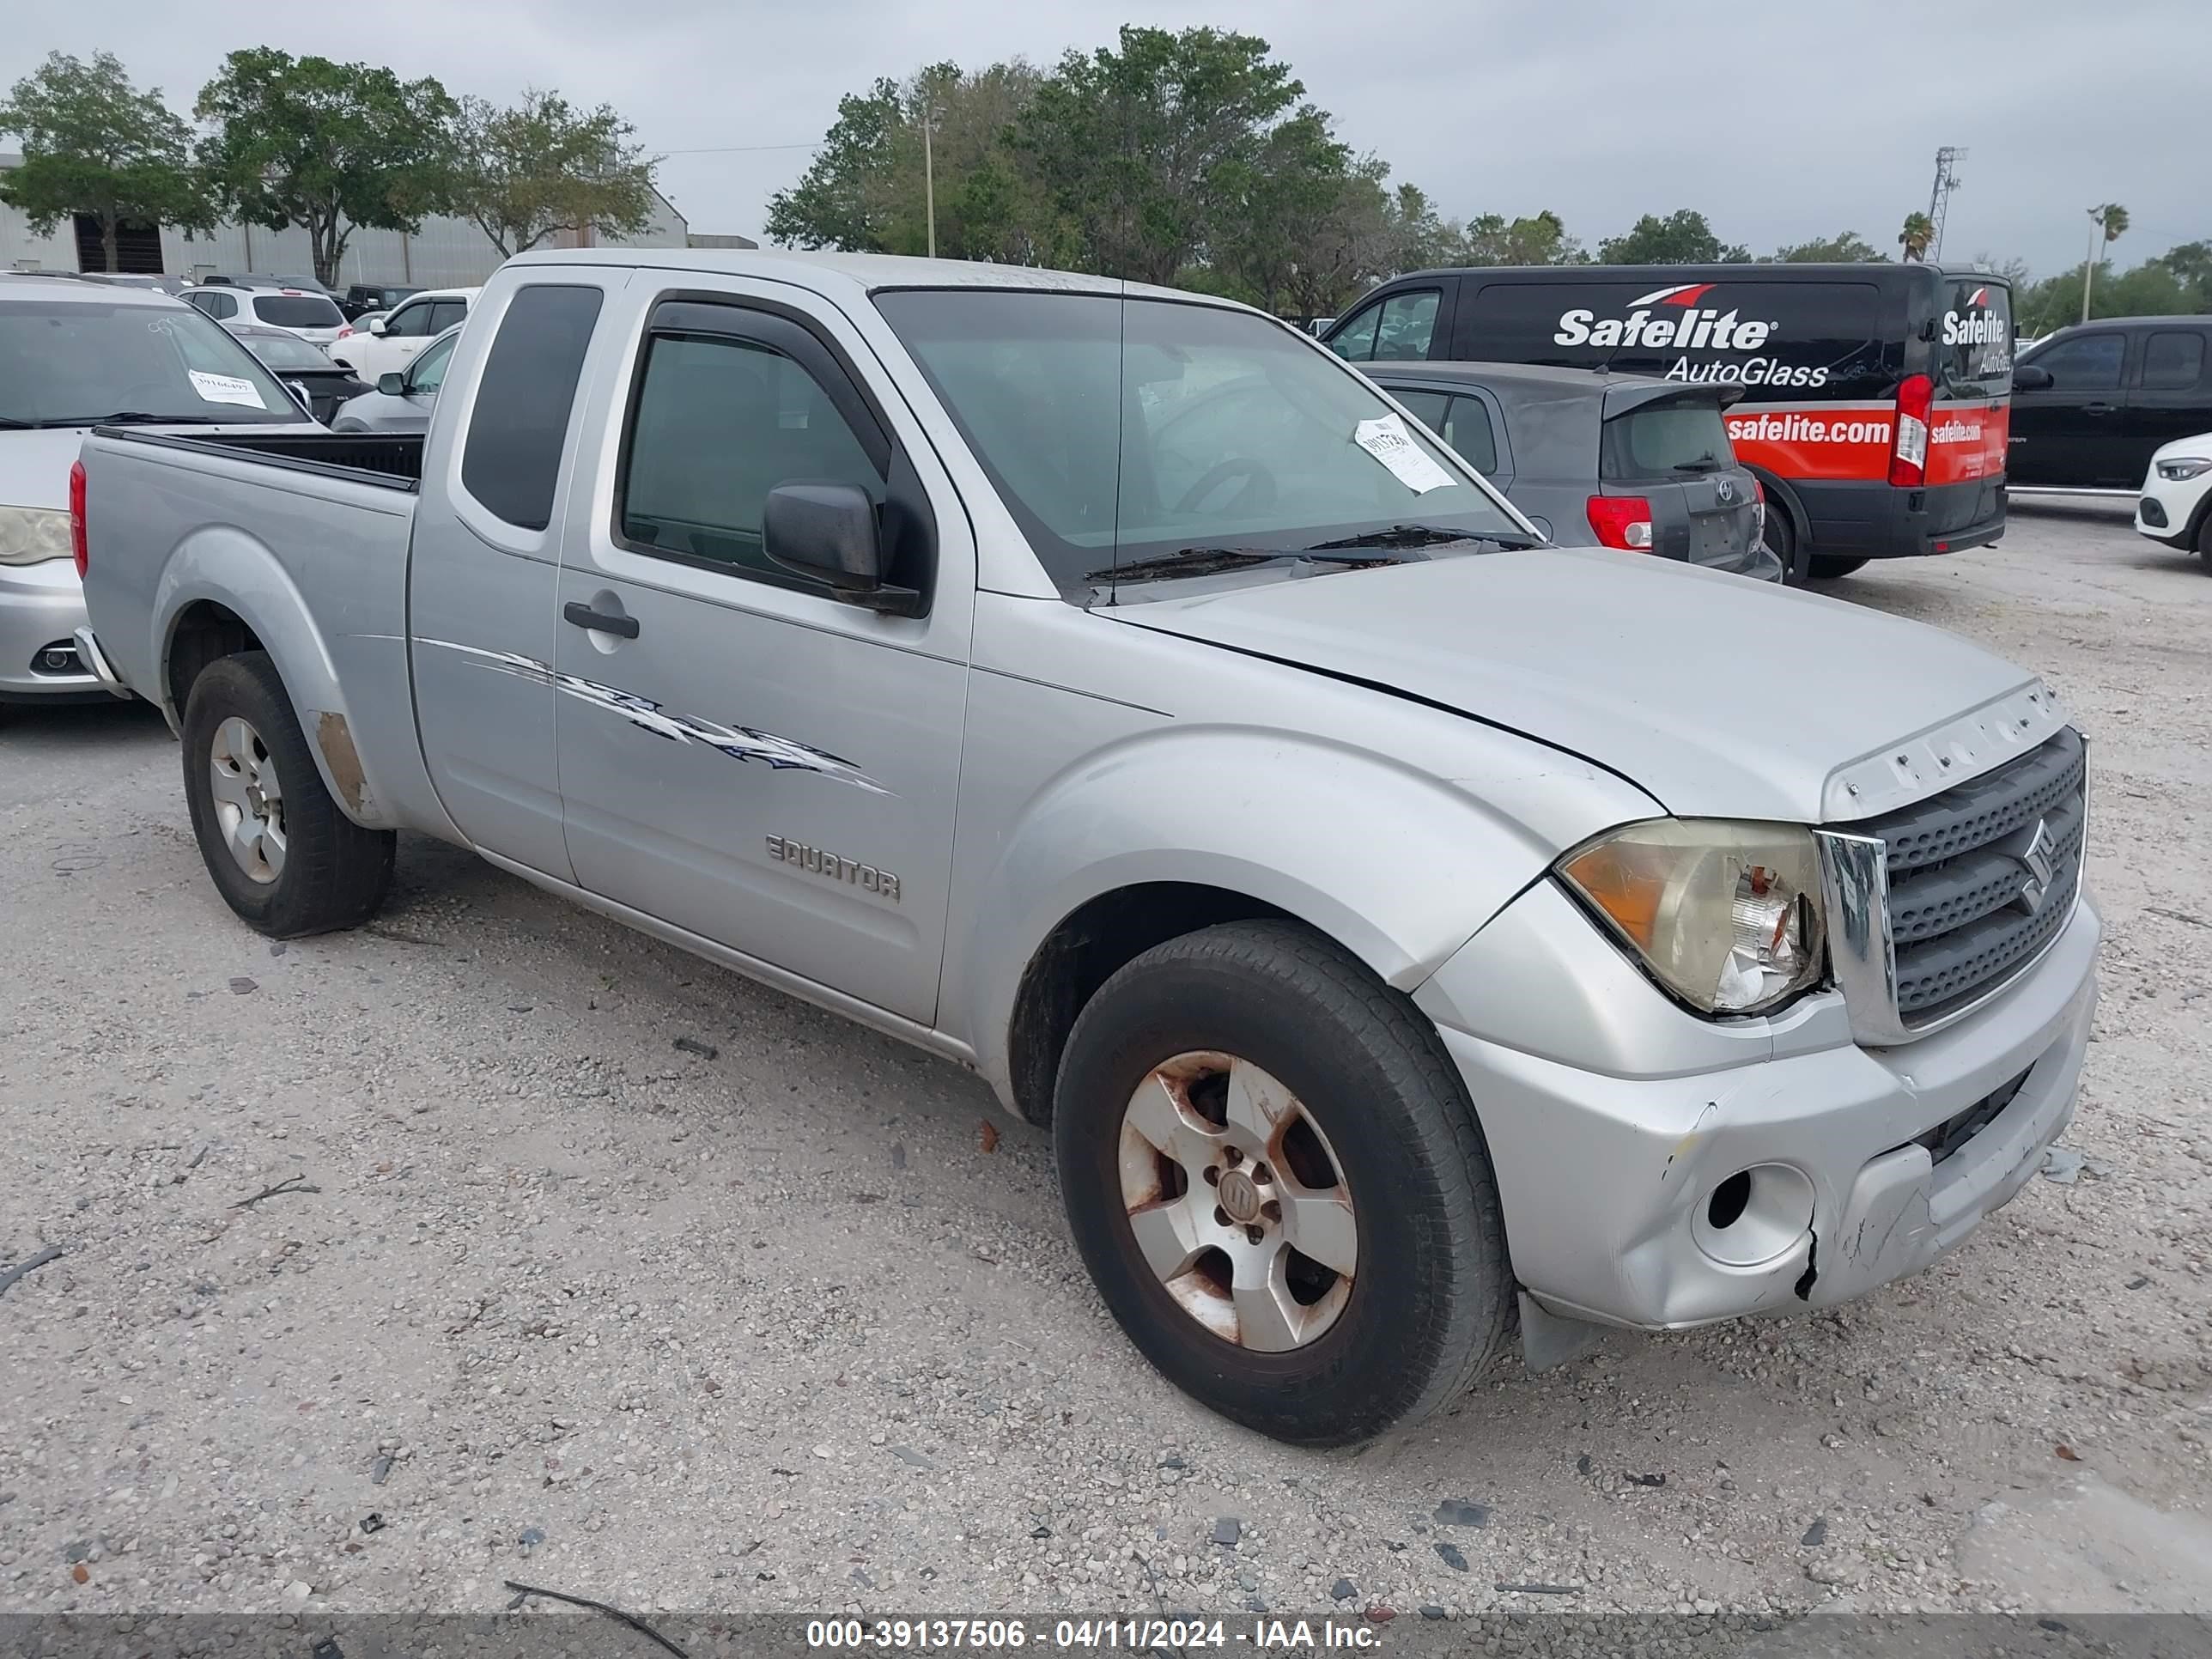 vin: 5Z6BD06T59C415732 5Z6BD06T59C415732 2009 suzuki equator 2500 for Sale in 33760, 5152 126Th Ave N, Clearwater, Florida, USA